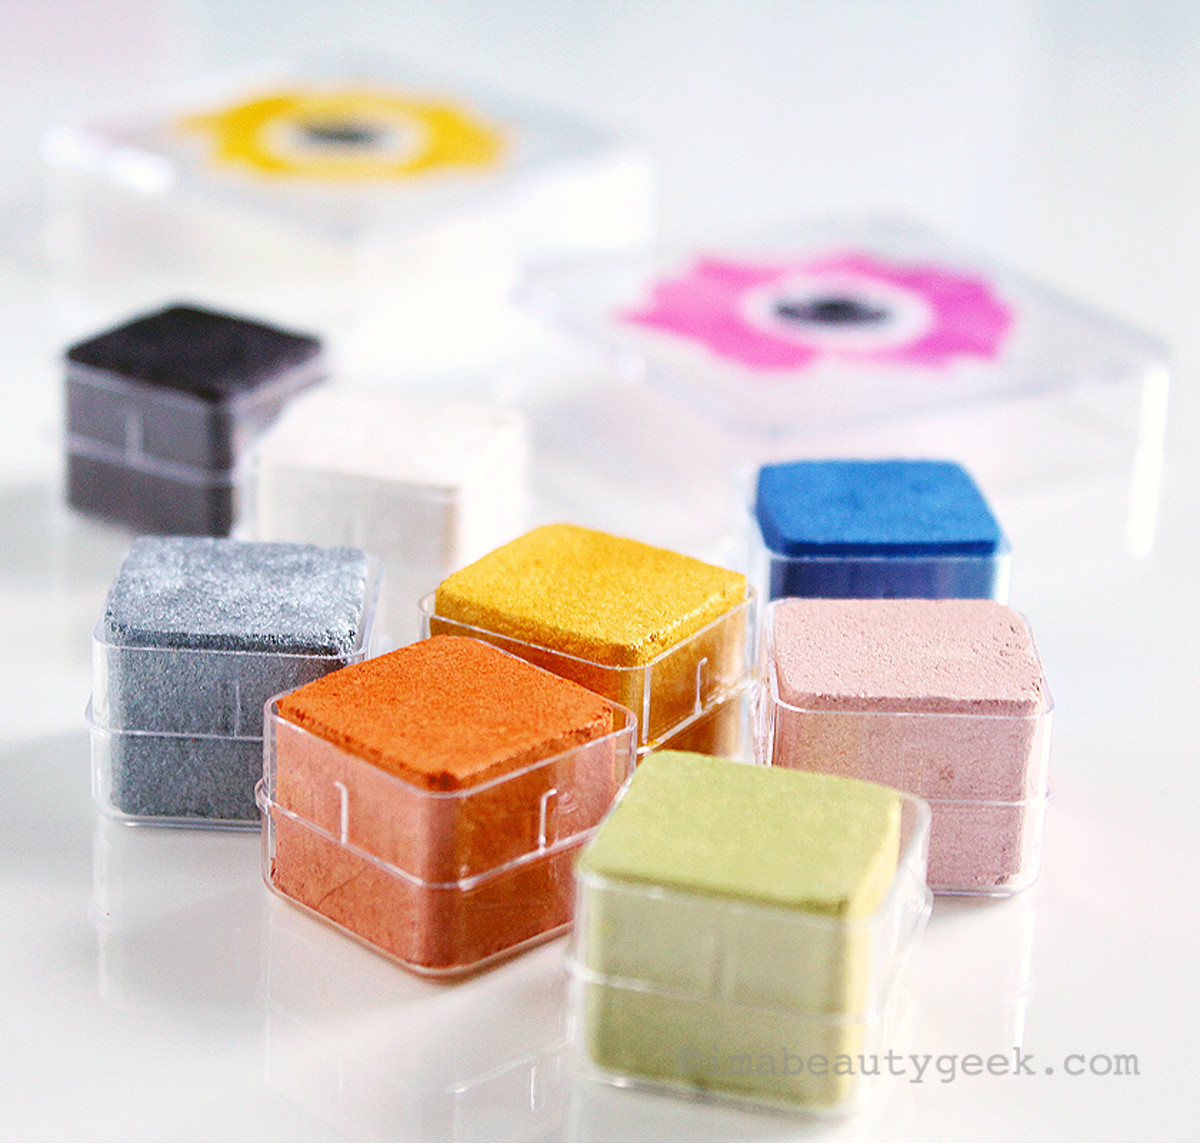 The Body Shop Spring 2015 Shimmer Cubes